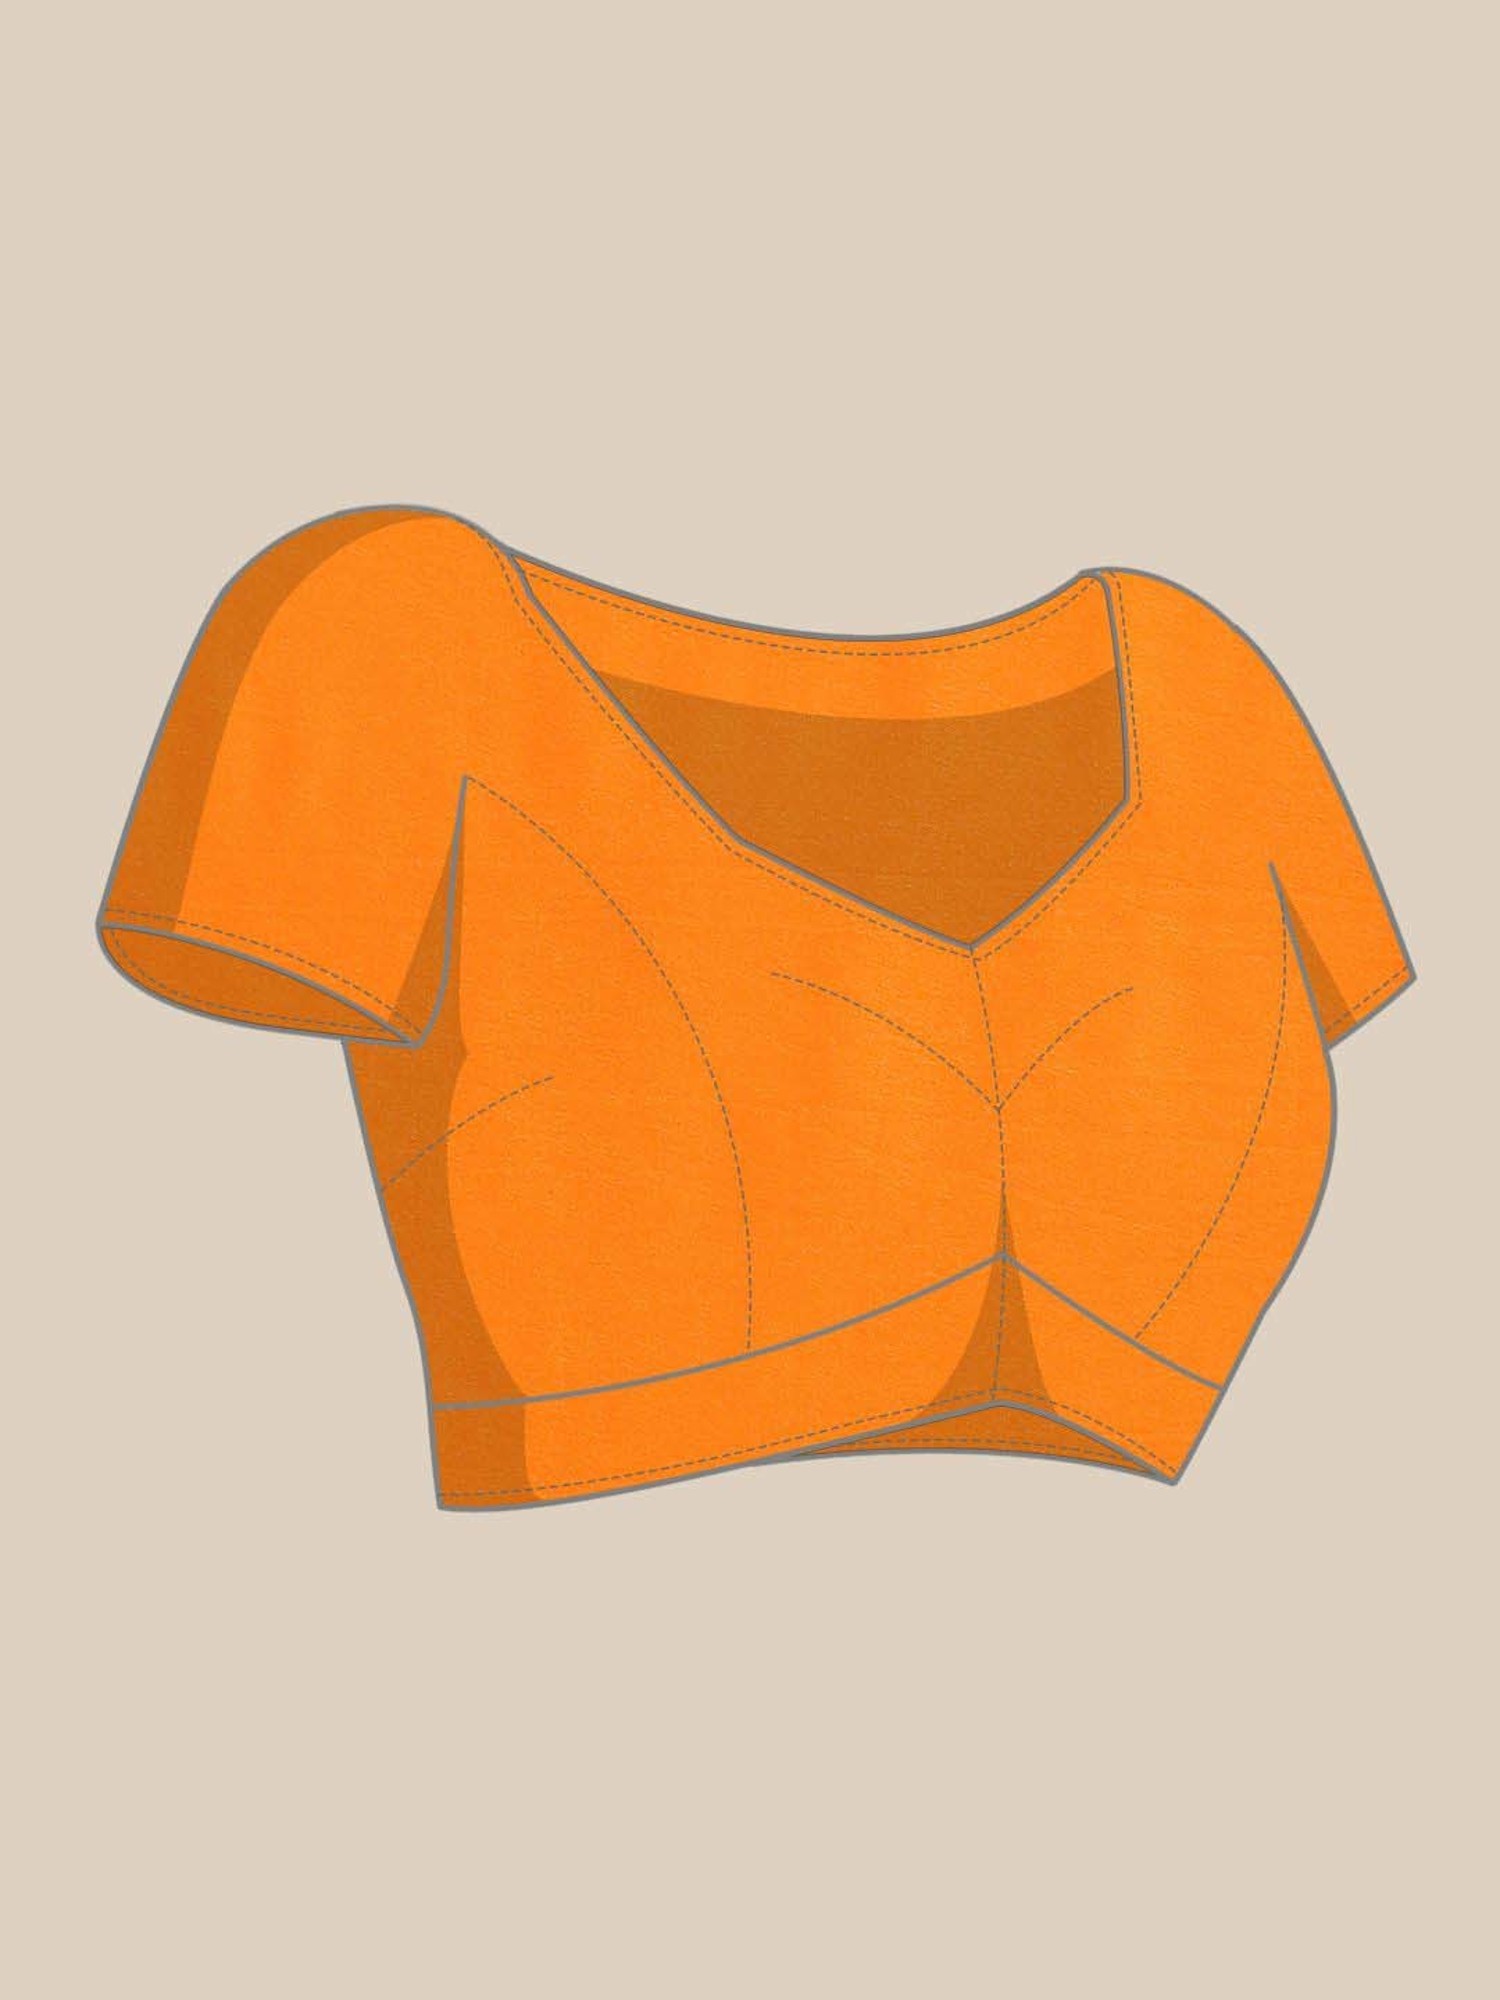 Flat Sketches Blouse Vector Images (over 2,100)